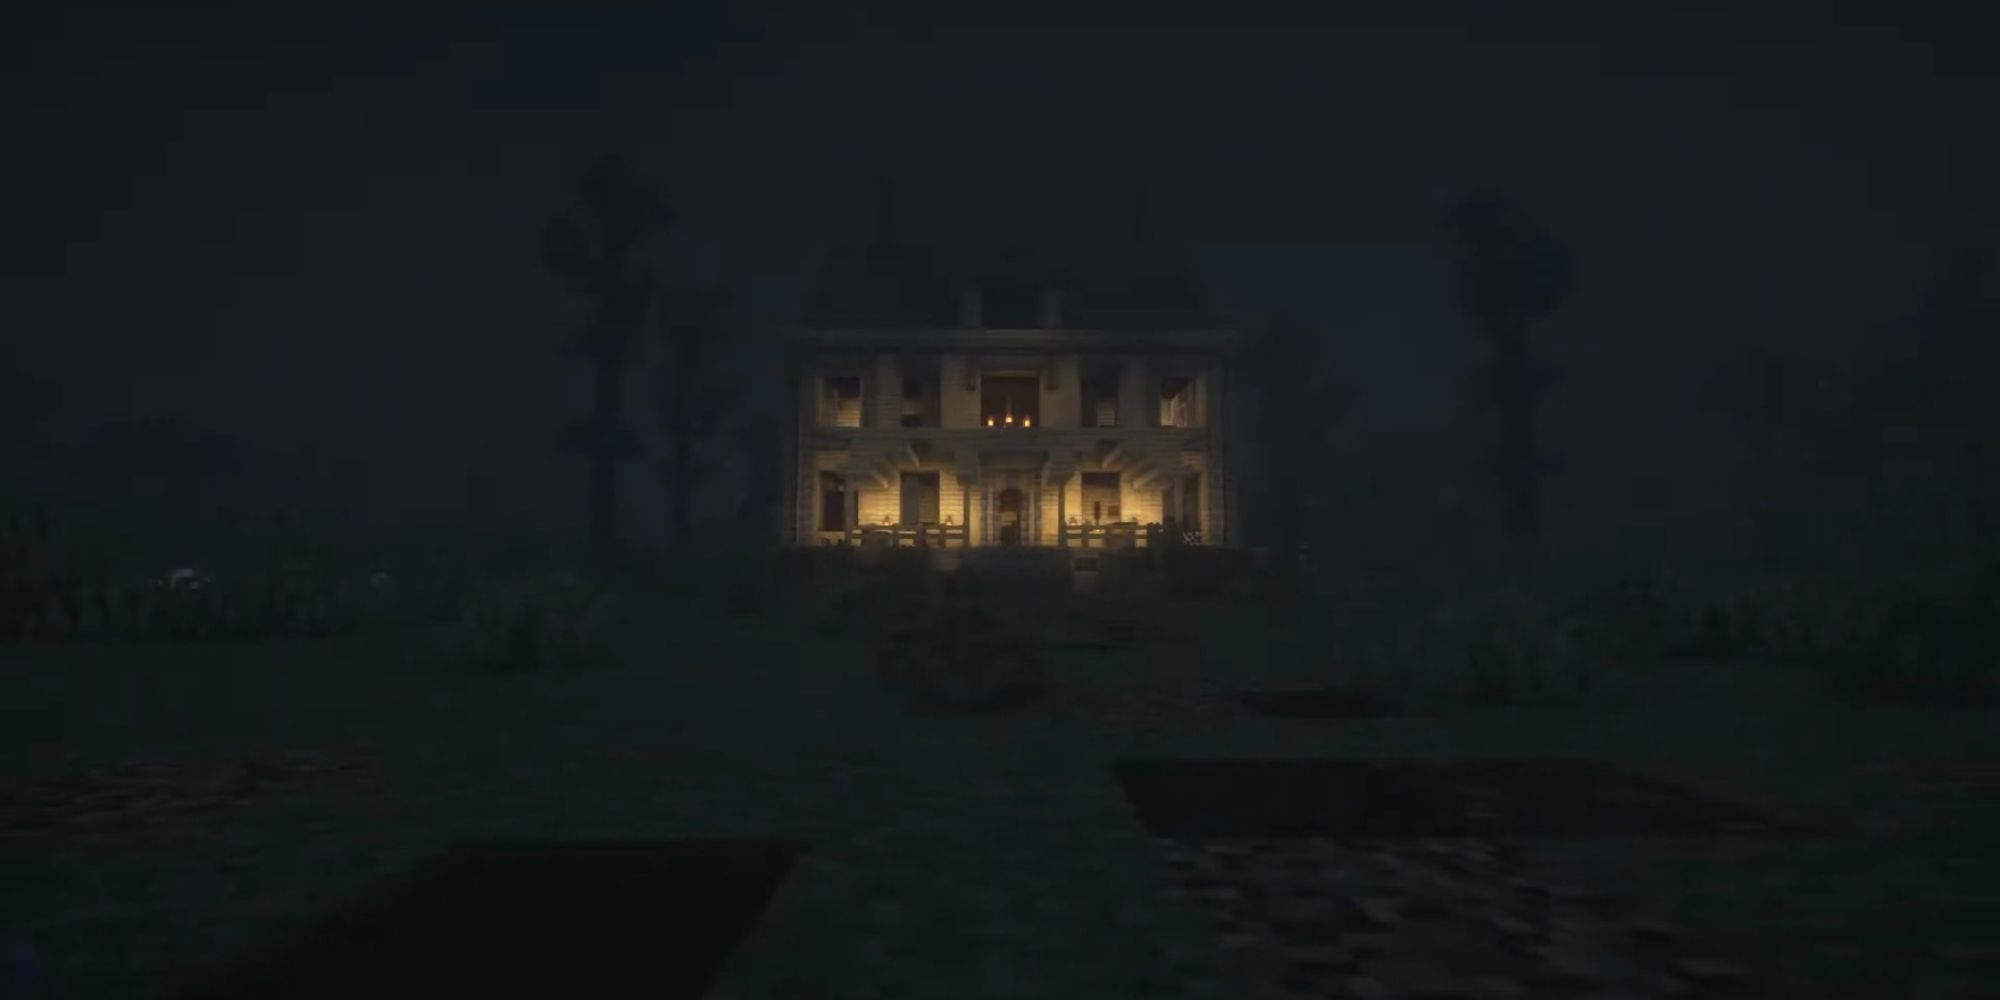 An image from Minecraft of the Conjuring House, the house that was the main setting of the horror film The Conjuring.